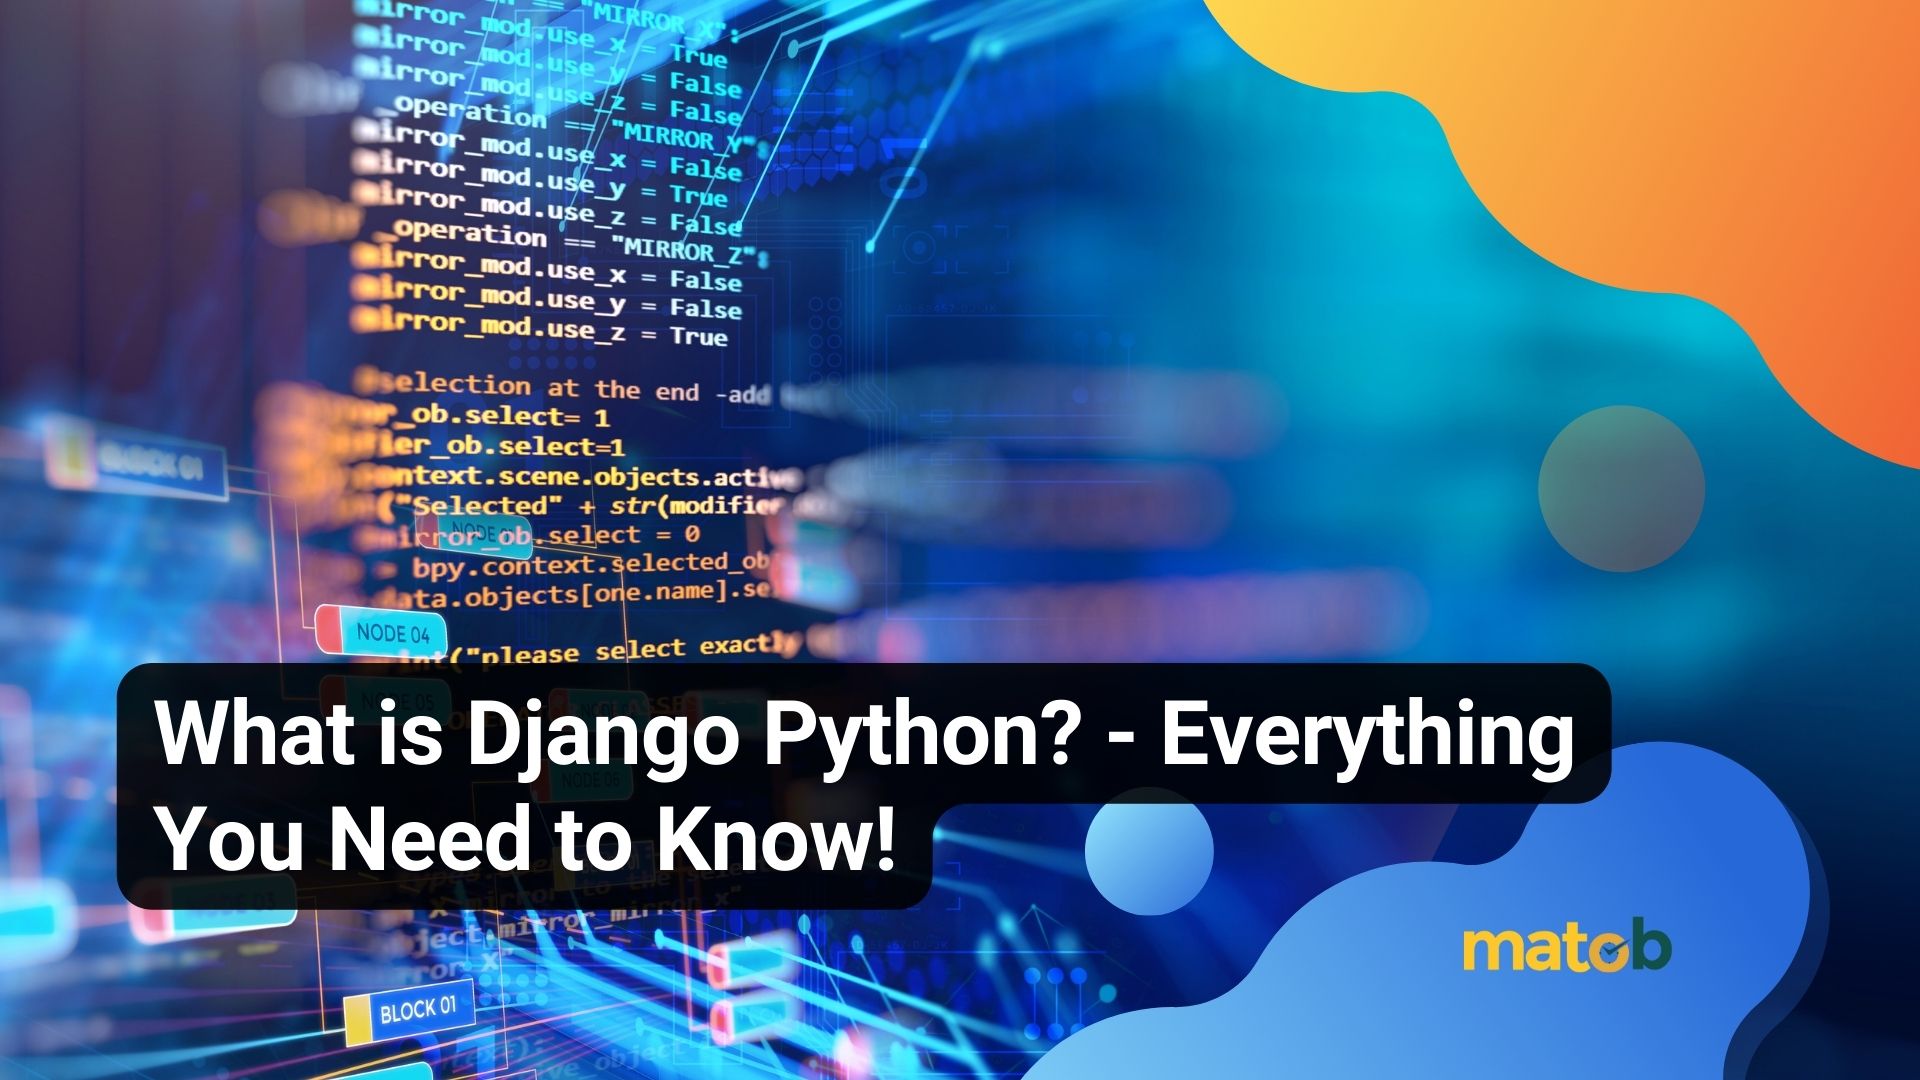 What is Django Python? - Everything You Need to Know!